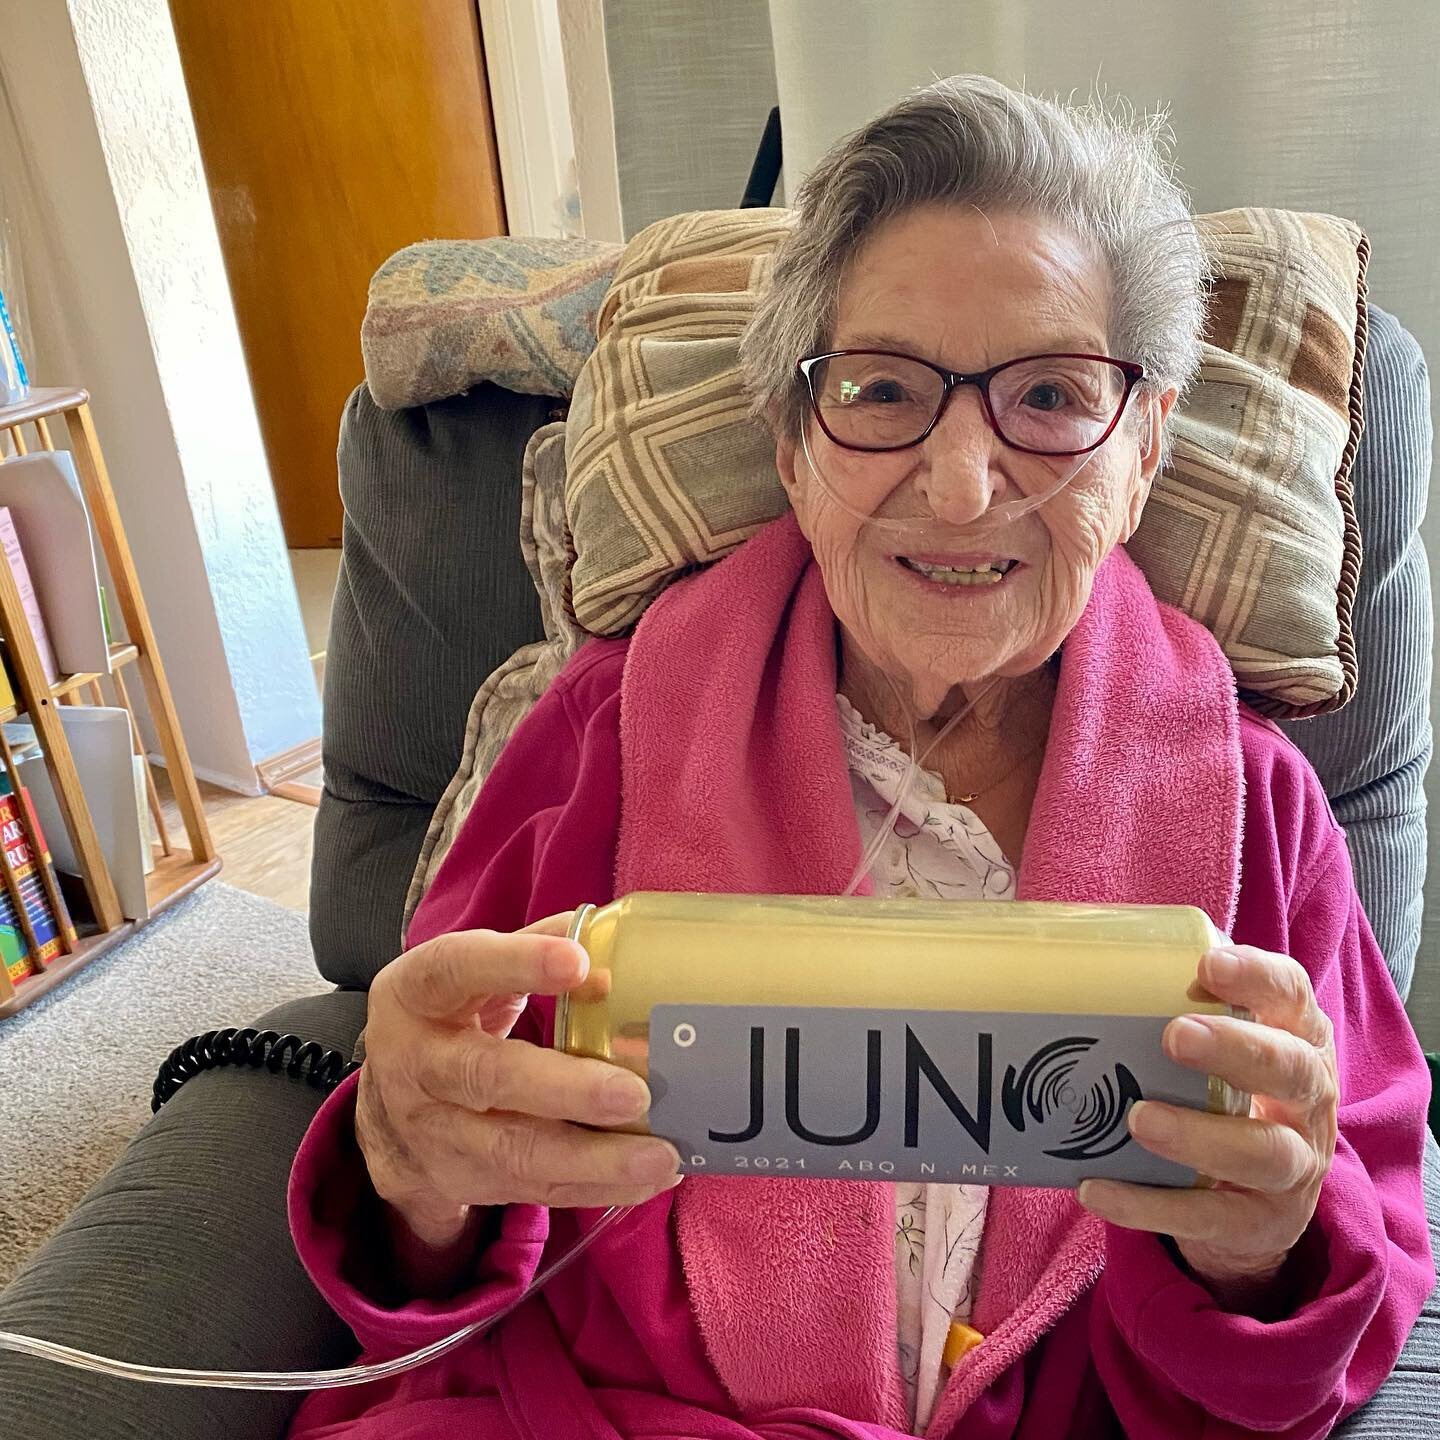 I stopped by @juno_abq for a beer with @lily.arite and Maxine gave grandma a little something for home ❤️ I got a little choked up when I showed her. So many of you care about her like she was your own&hellip; Thank you @juno_abq for always taking ca